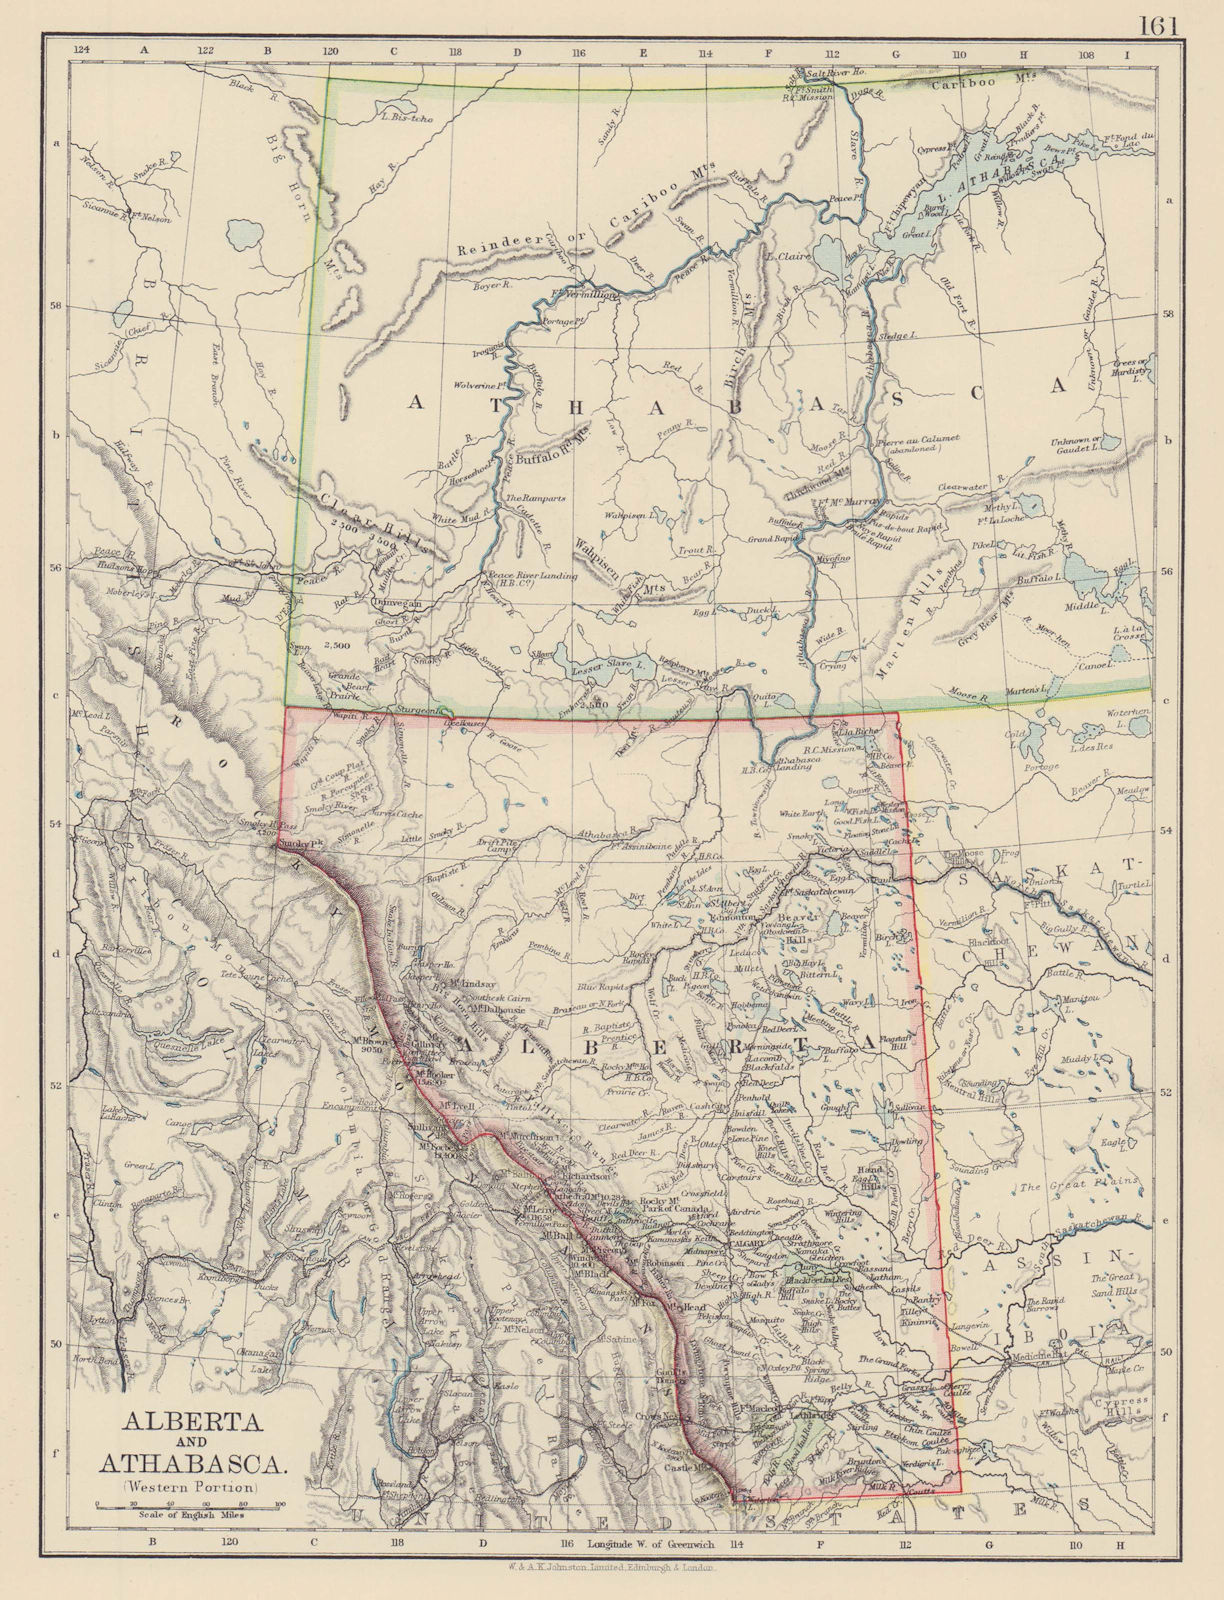 Associate Product ATHABASCA & ALBERTA Province map w/ Canadian Pacific Railroad. JOHNSTON 1901